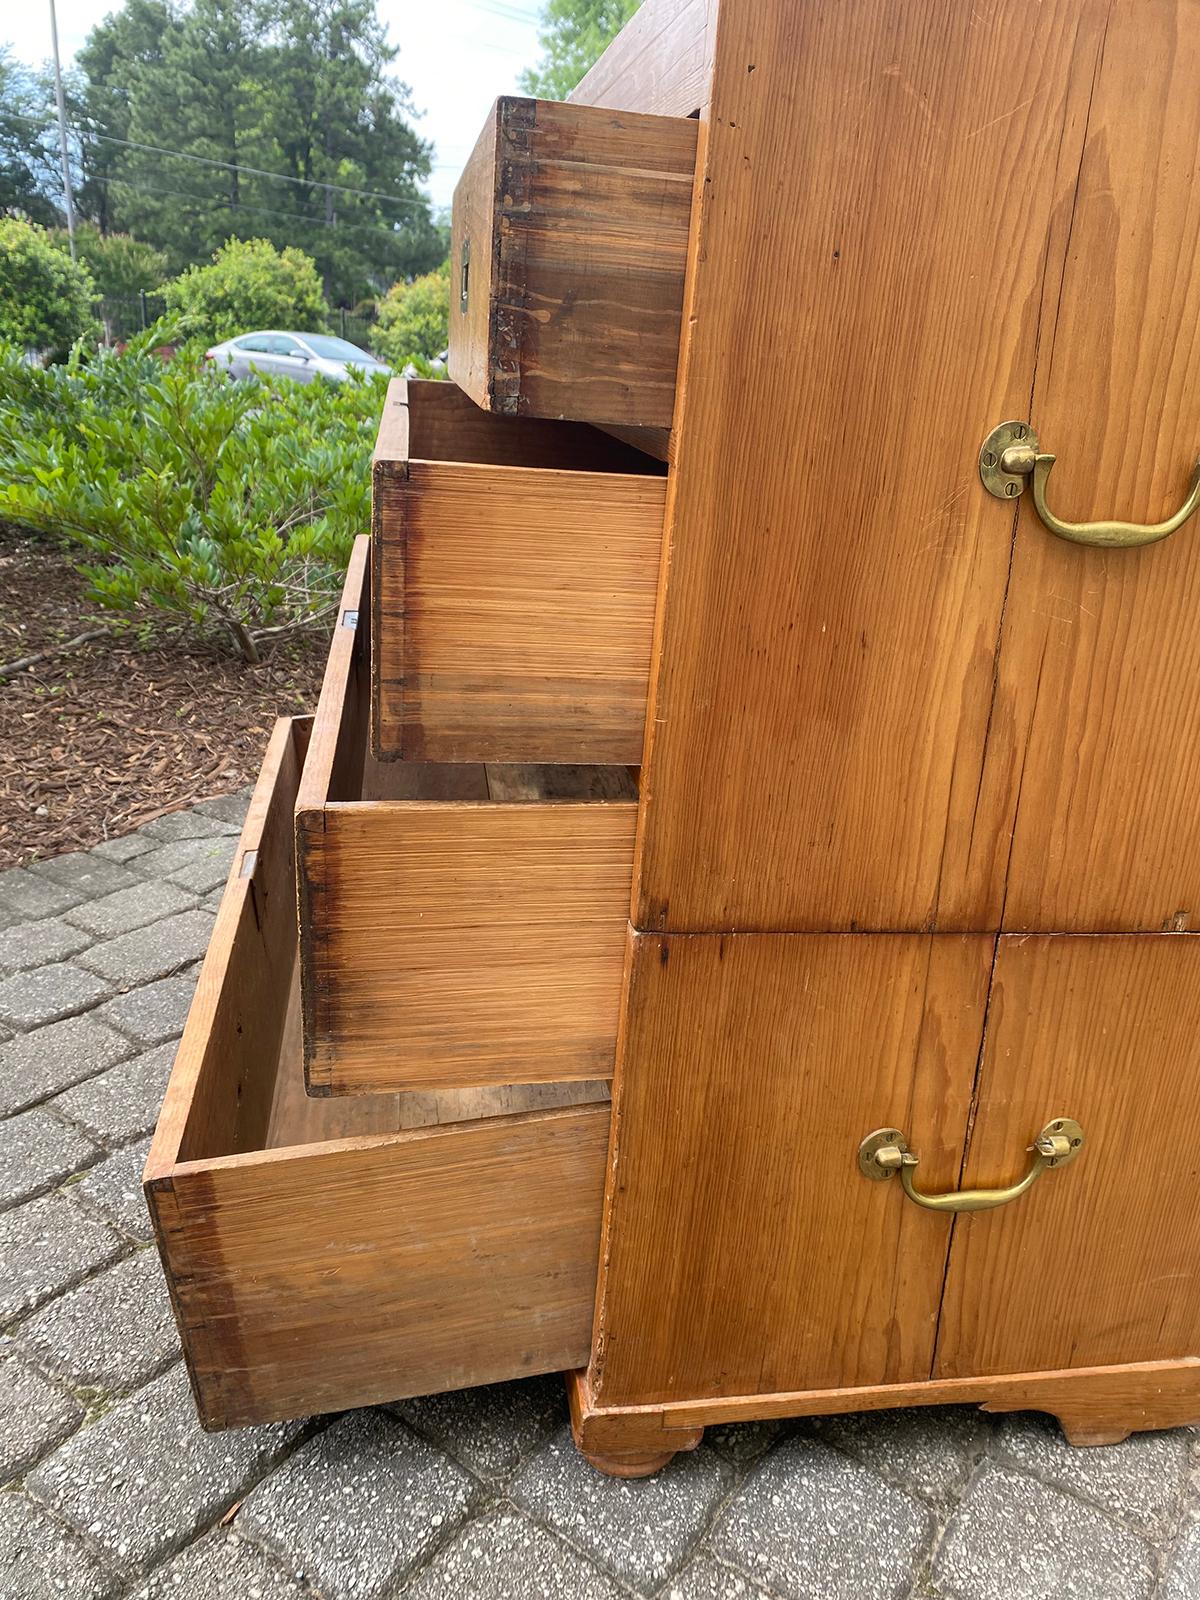 Circa 1880s-1890s English Pine Campaign Chest of Drawers For Sale 4